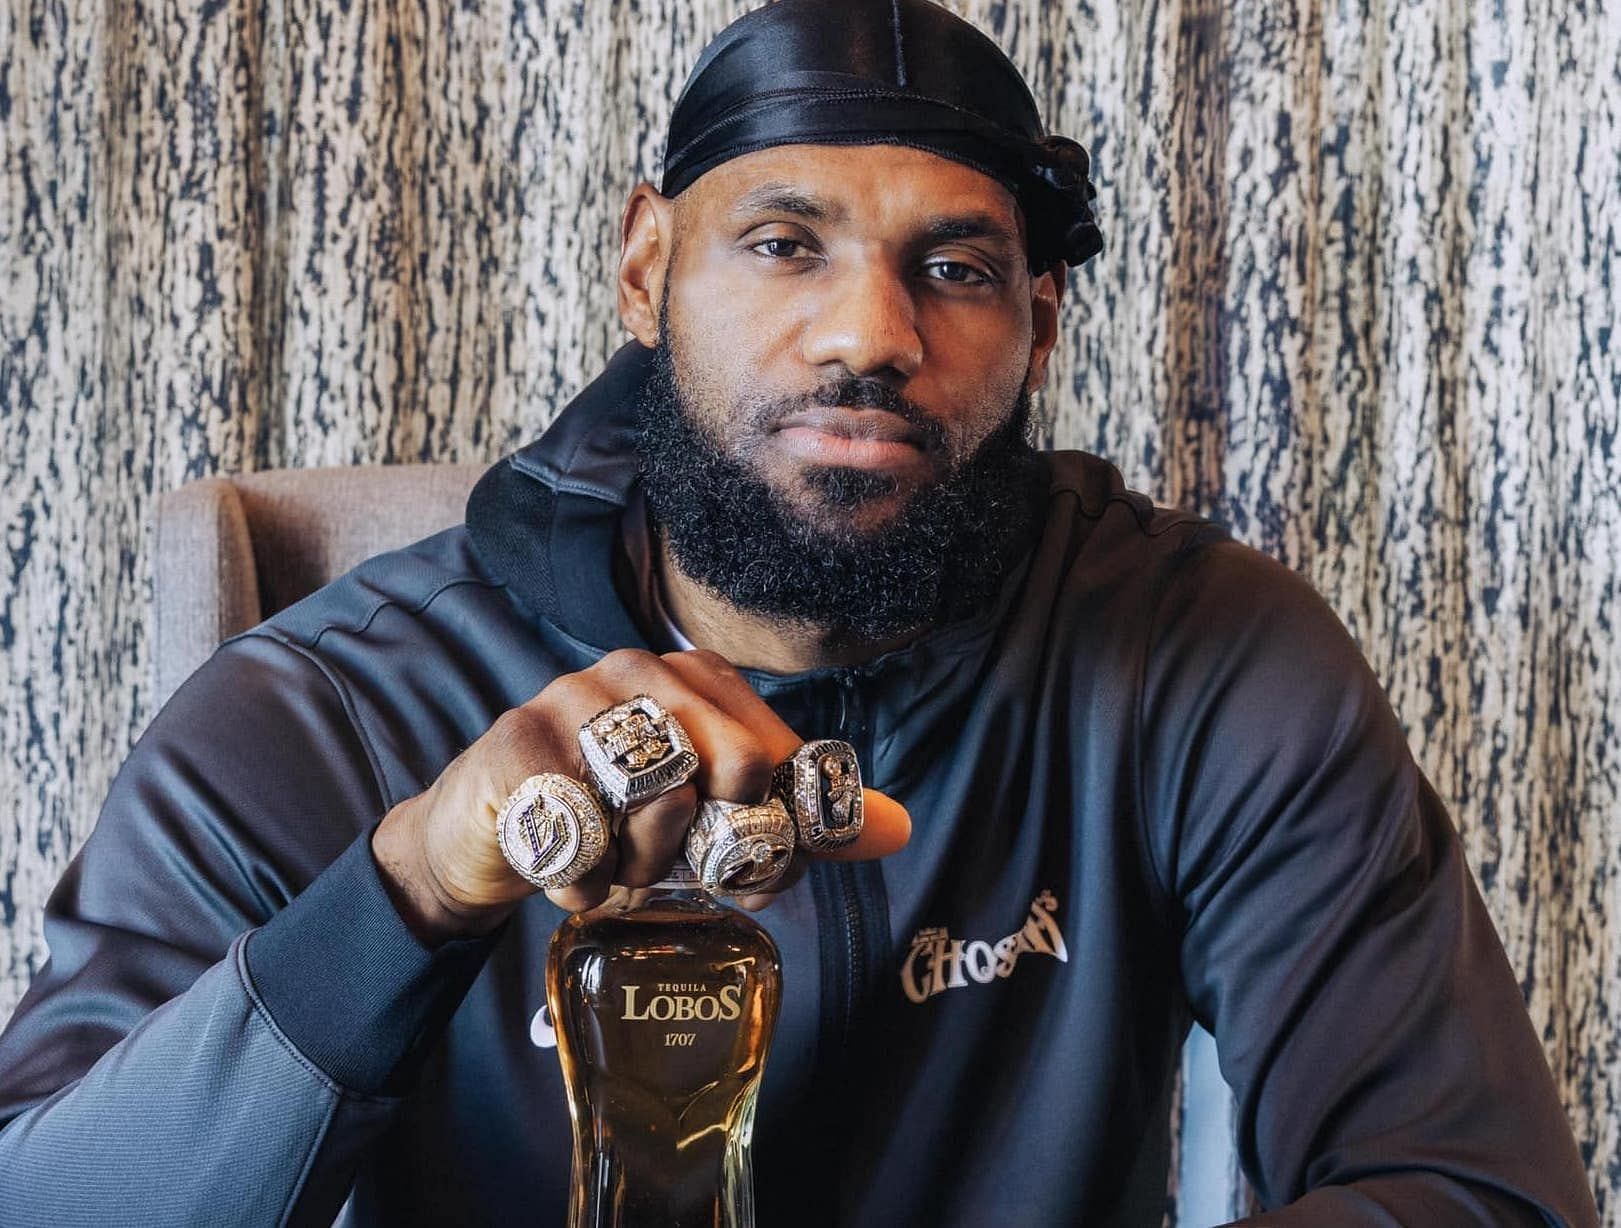 LA Lakers star forward LeBron James advertising his tequila brand &quot;Lobos 1707 Tequila&quot;